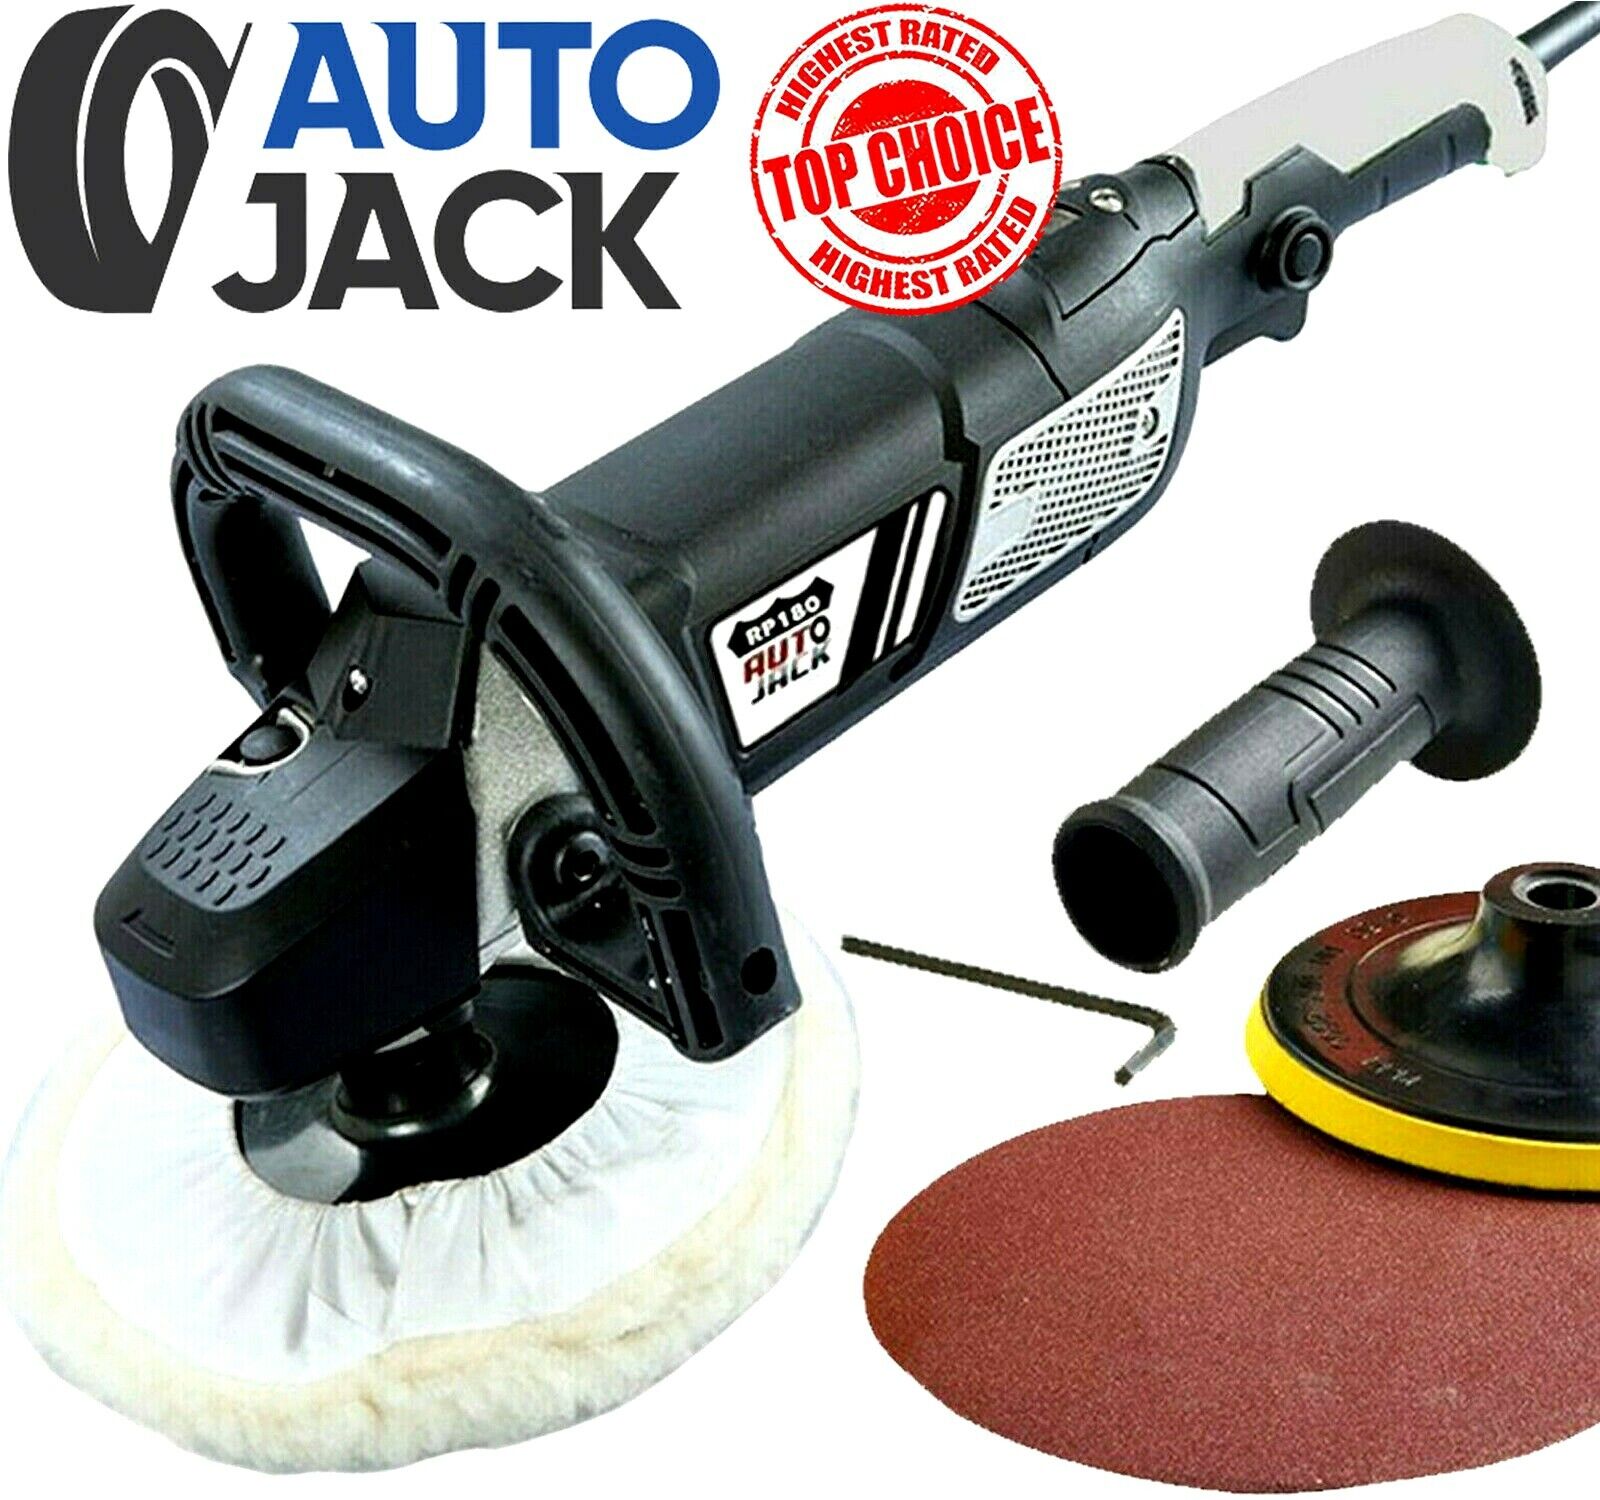 Electric Rotary Car Polisher Max 46% OFF Buffer Mac OFFicial mail order Buffing Polishing Sander